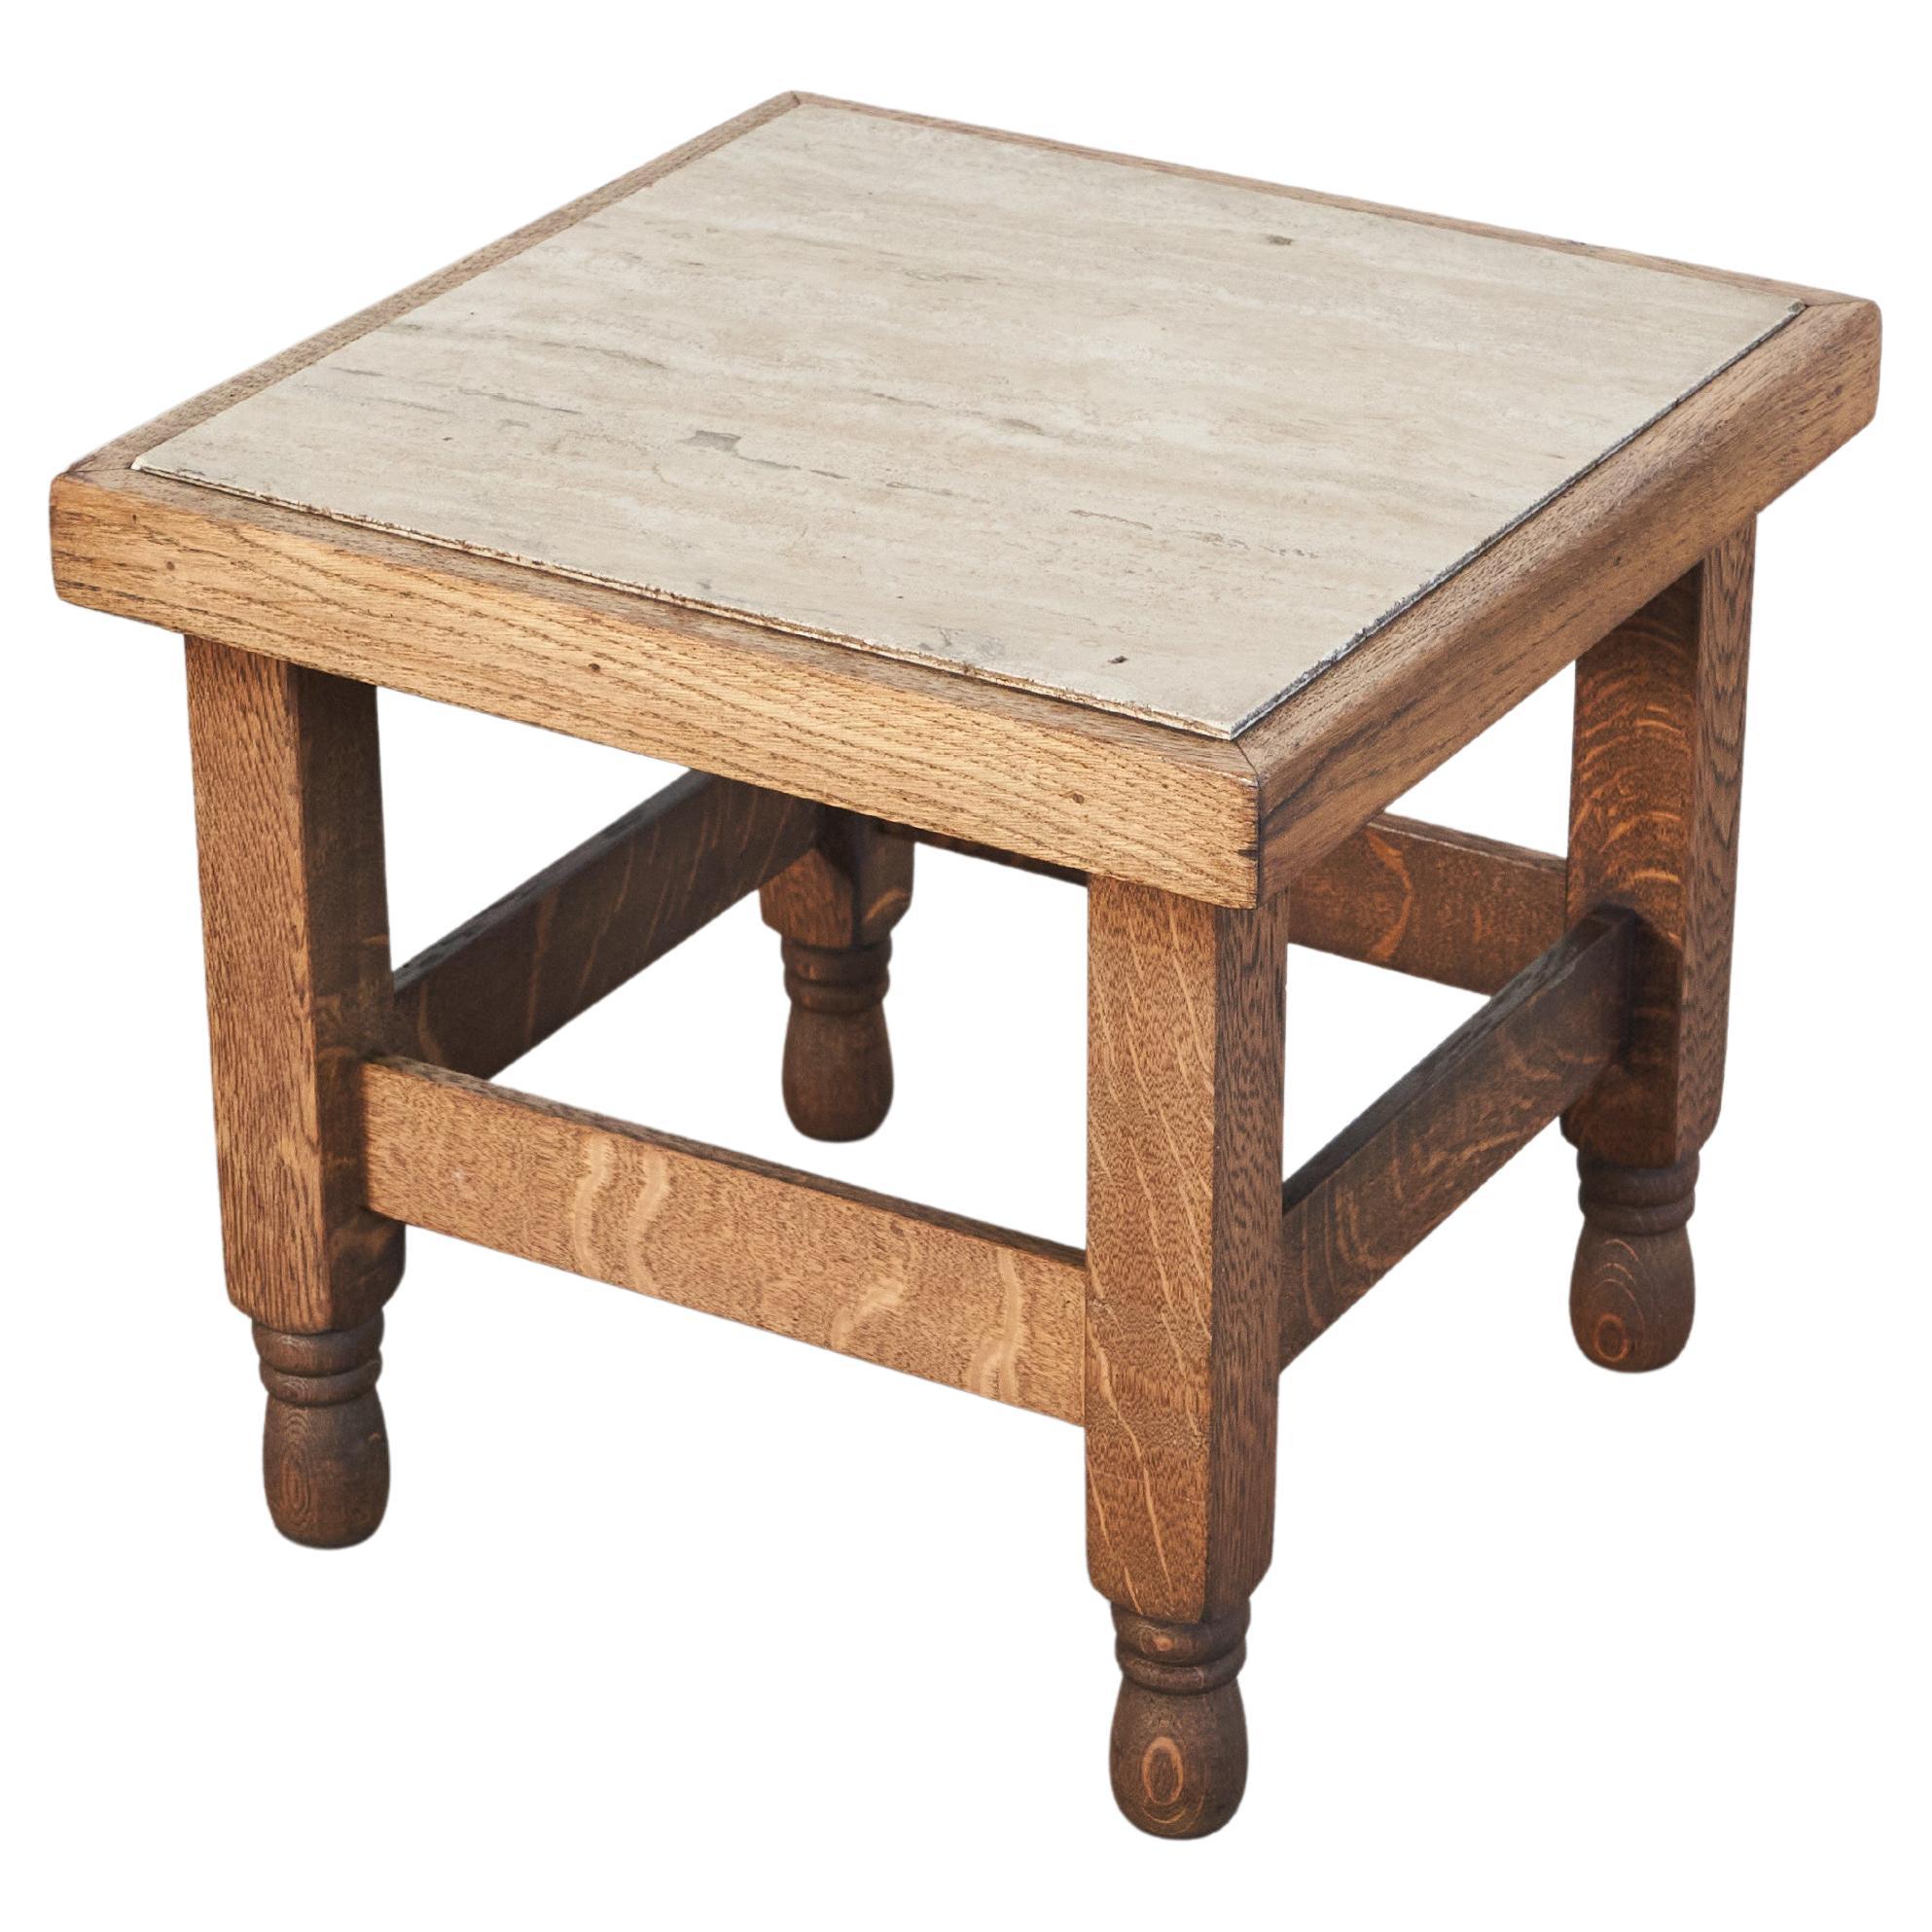 Art Deco Side Table in Solid Oak and Travertine 1930s For Sale